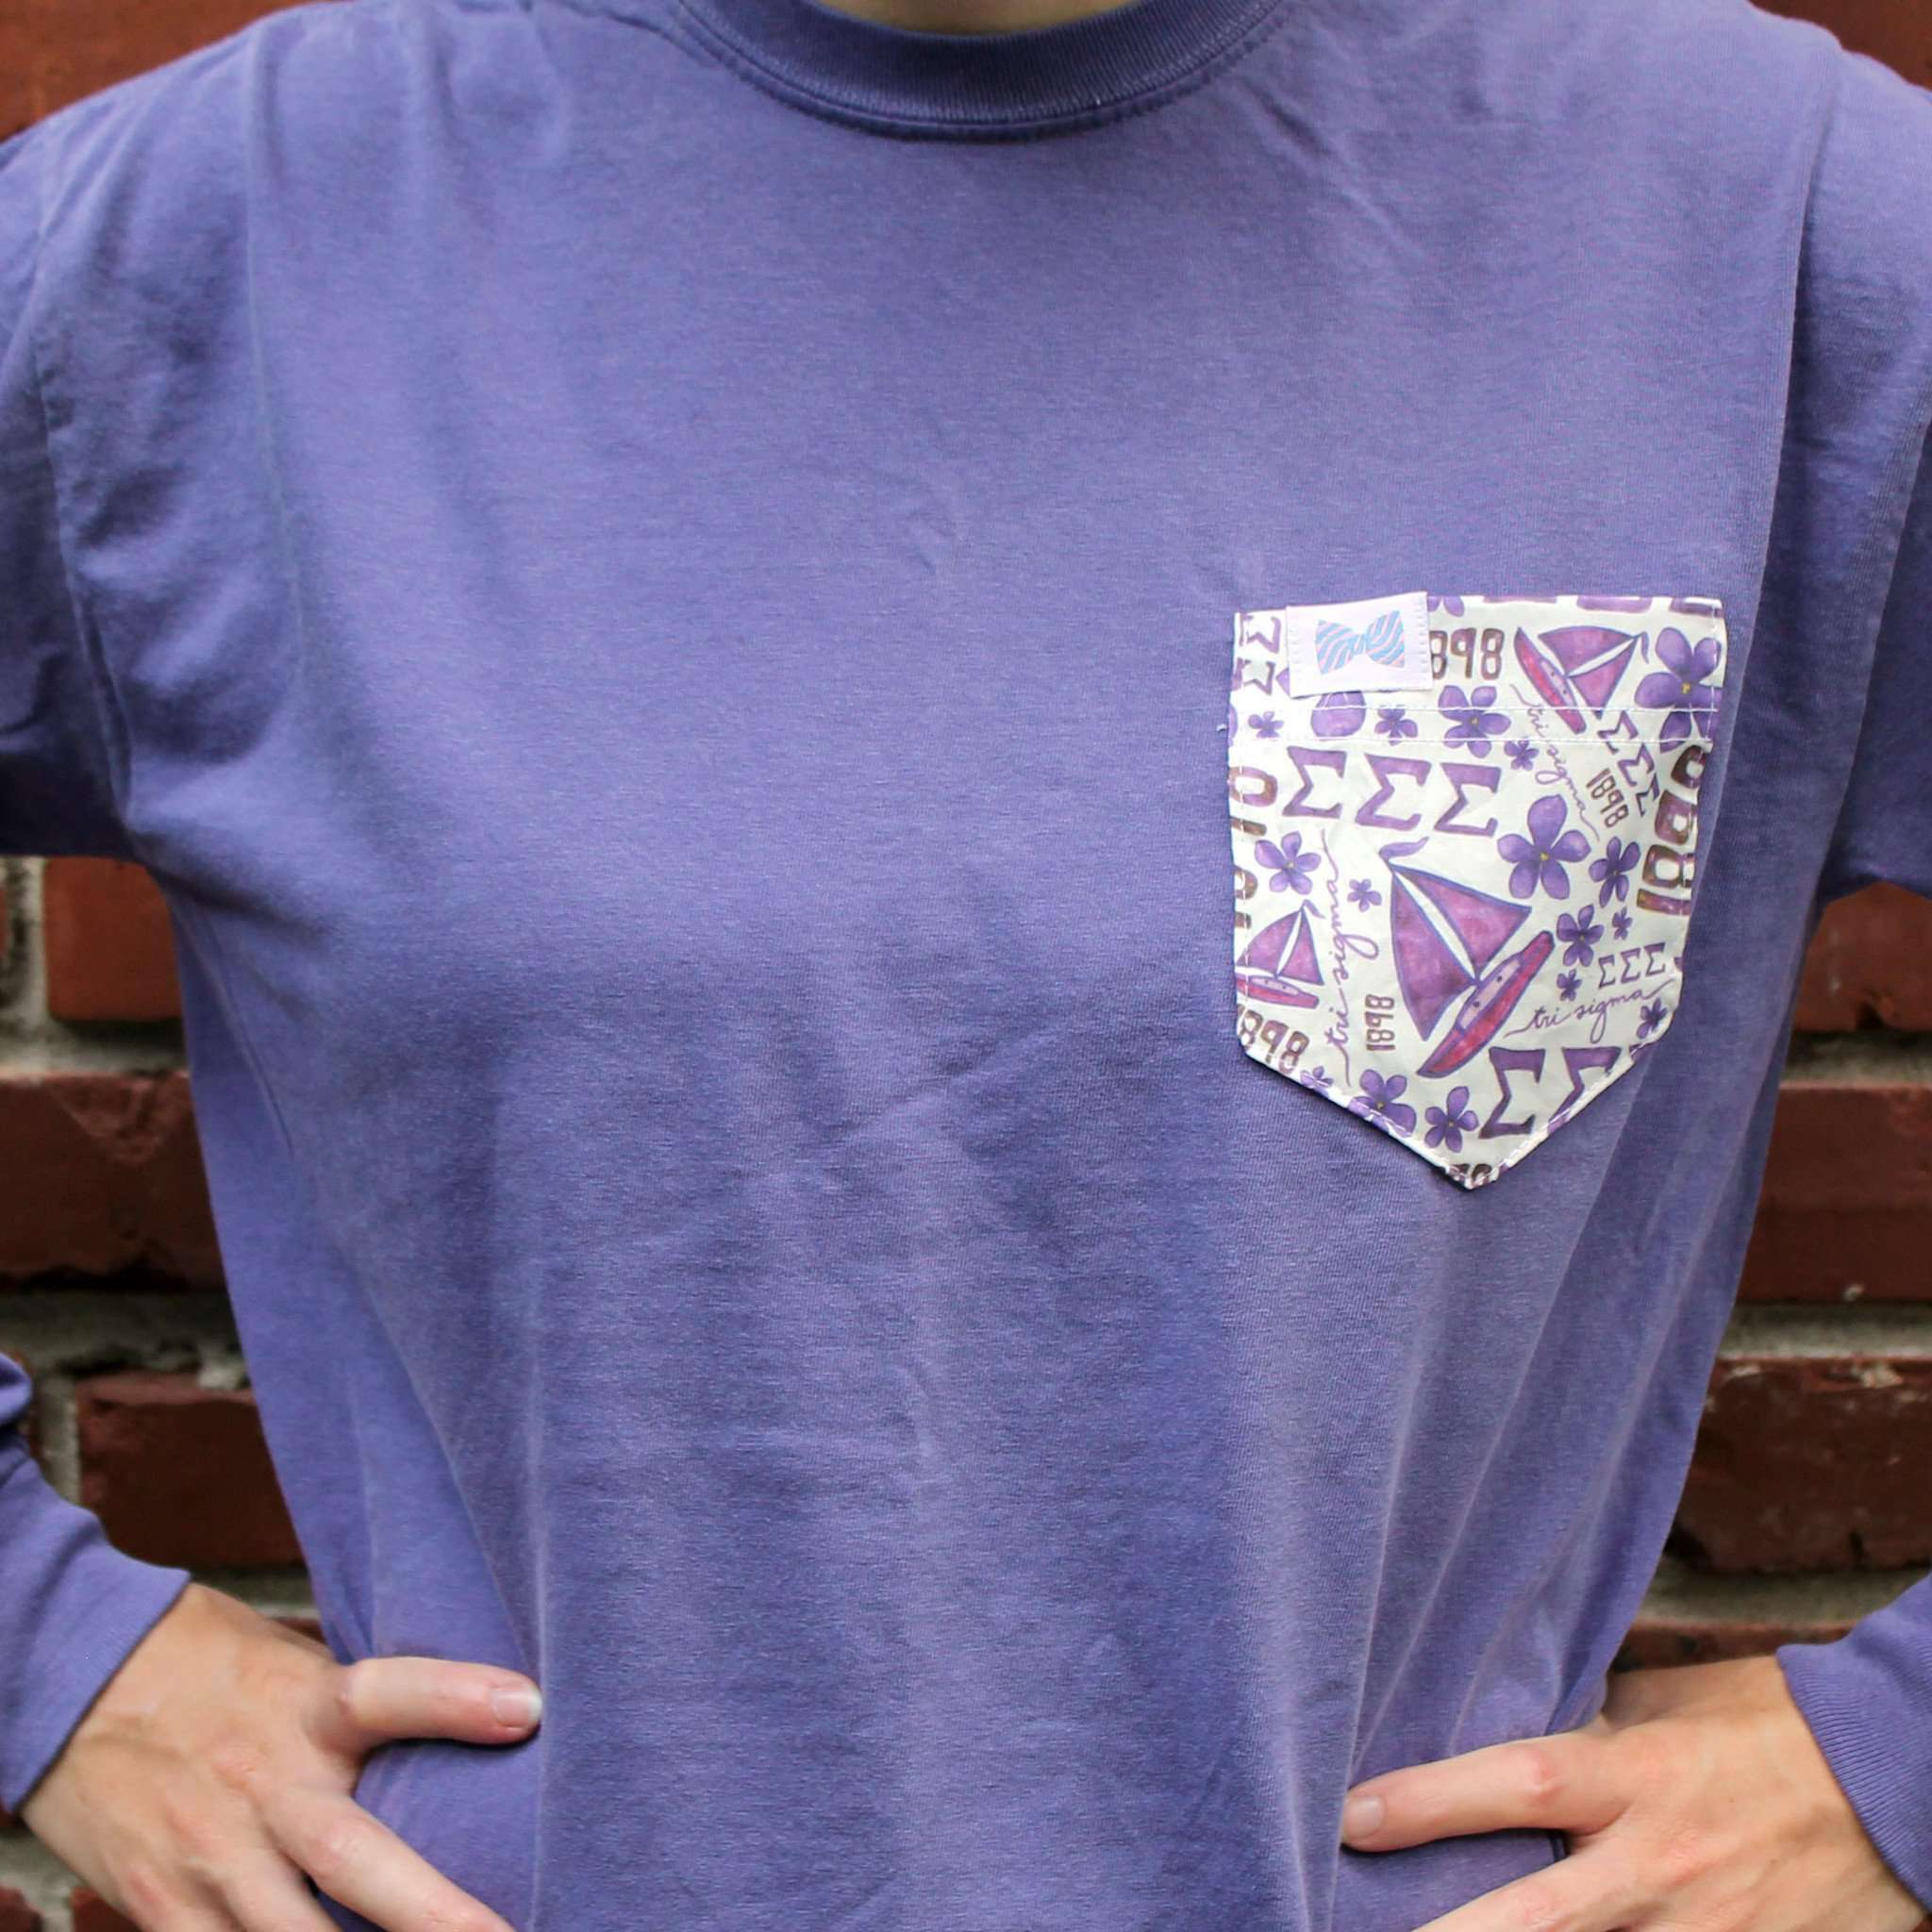 Sigma Sigma Sigma Long Sleeve Tee Shirt in Grape with Pattern Pocket by the Frat Collection - Country Club Prep